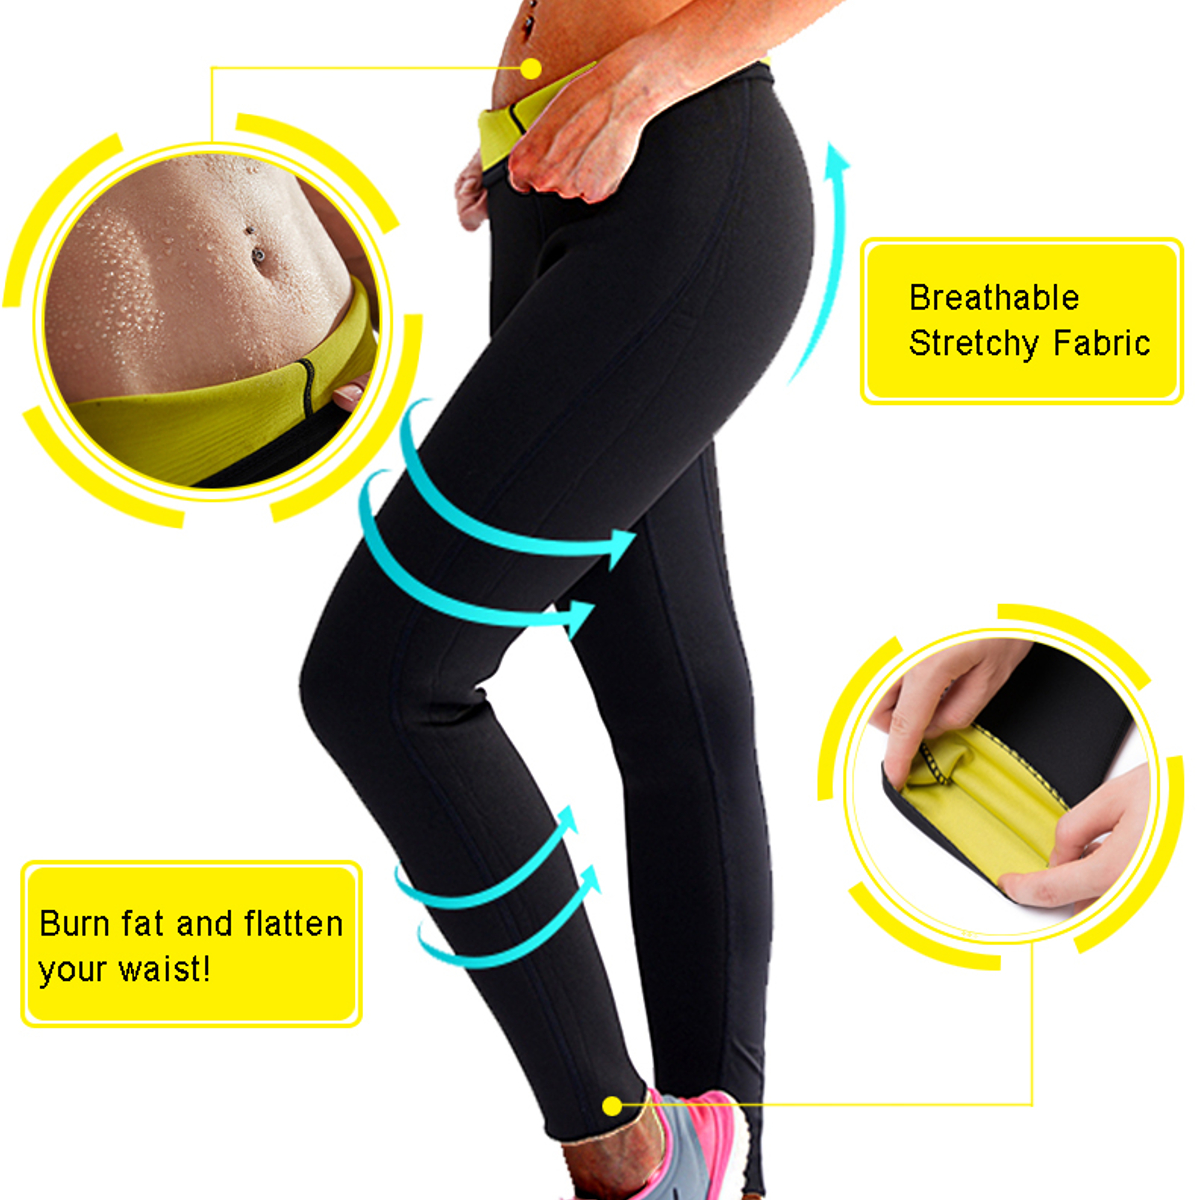 Unisex-Neoprene-Hot-Body-Accelerate-Sweating-Slimming-Fitness-Trousers-Yoga-Sports-Pants-1447219-2